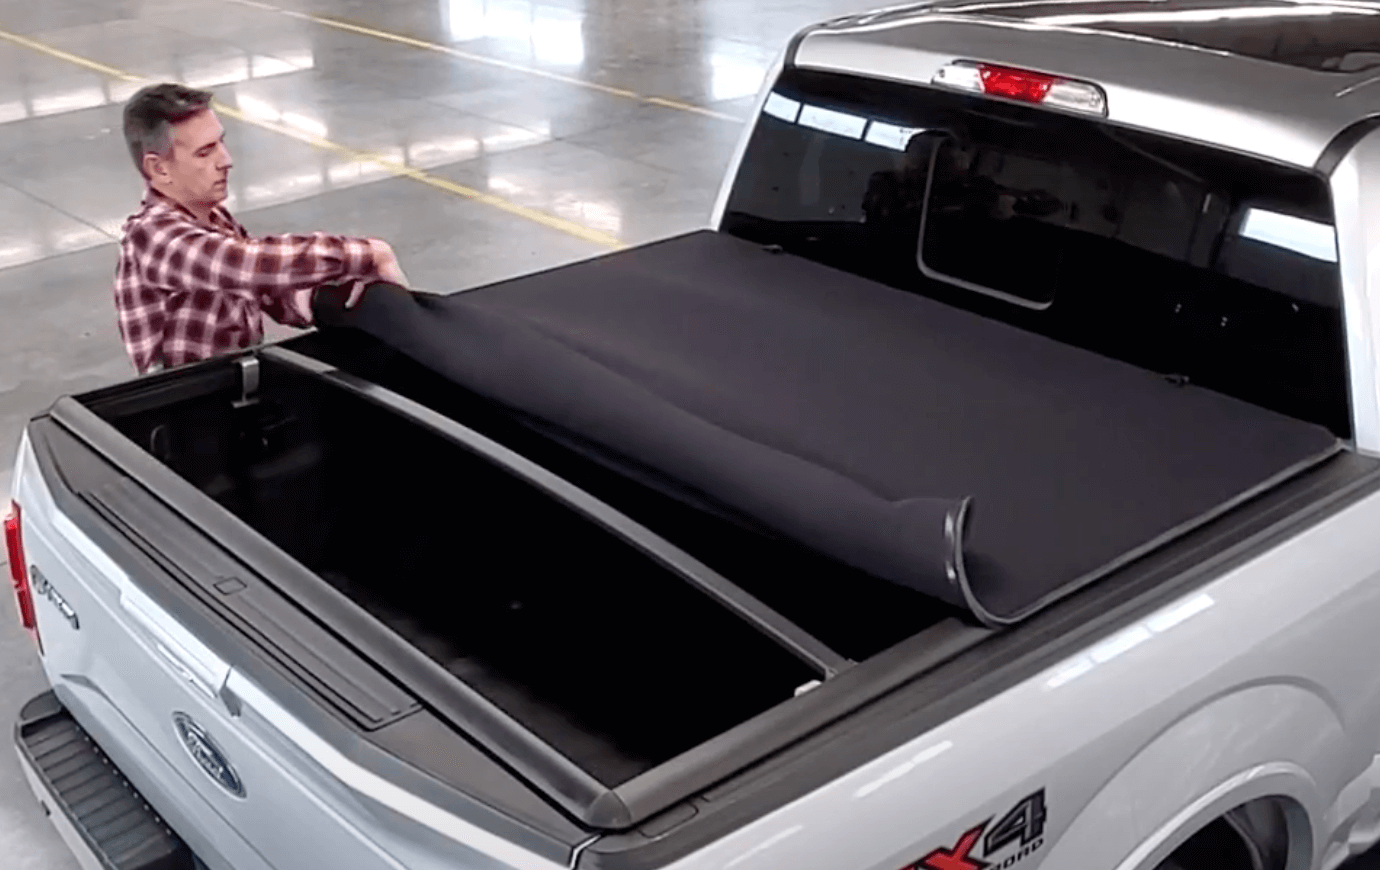 Rolling up Sawtooth Stretch expandable tonneau cover on a Chevrolet Silverado 1500 / GMC Sierra 1500